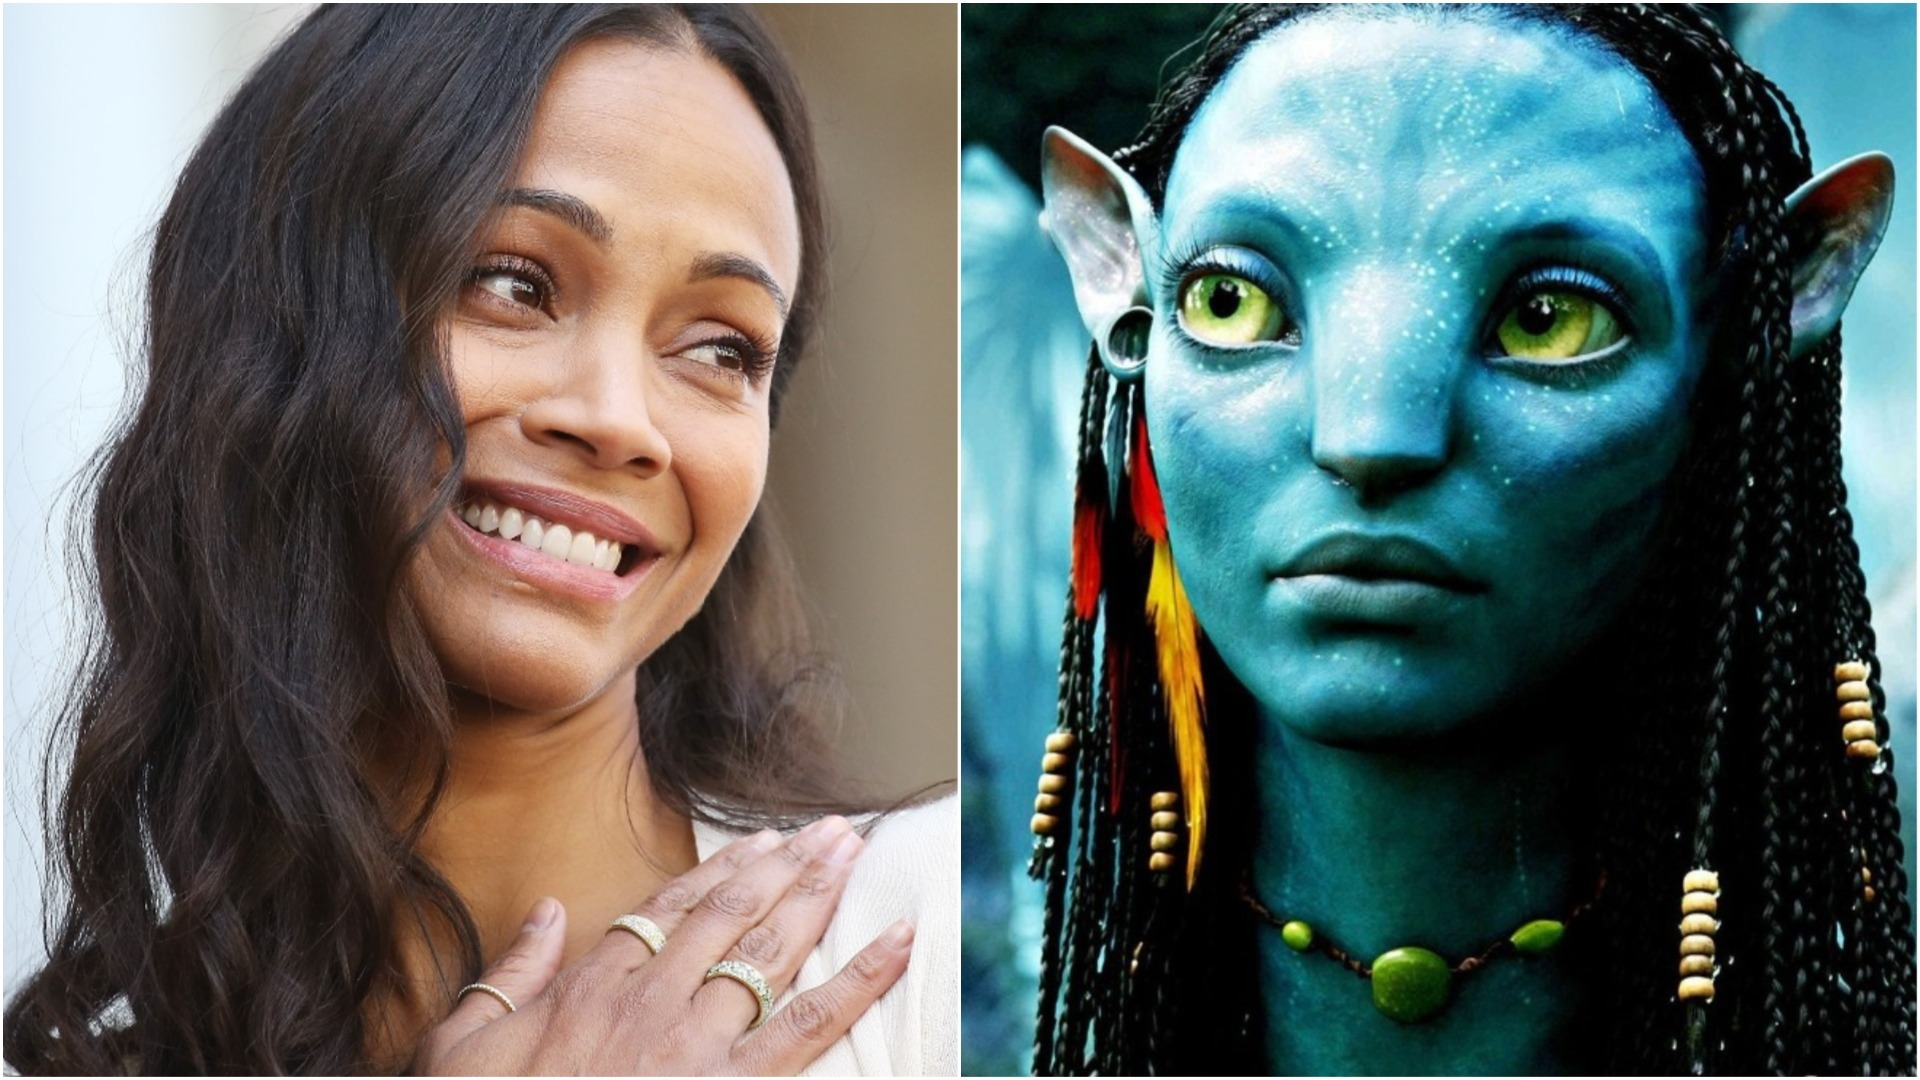 Zoe Saldana hailed real winner by fans after Avatar reclaims topgrossing  movie of all time from Avengers Endgame